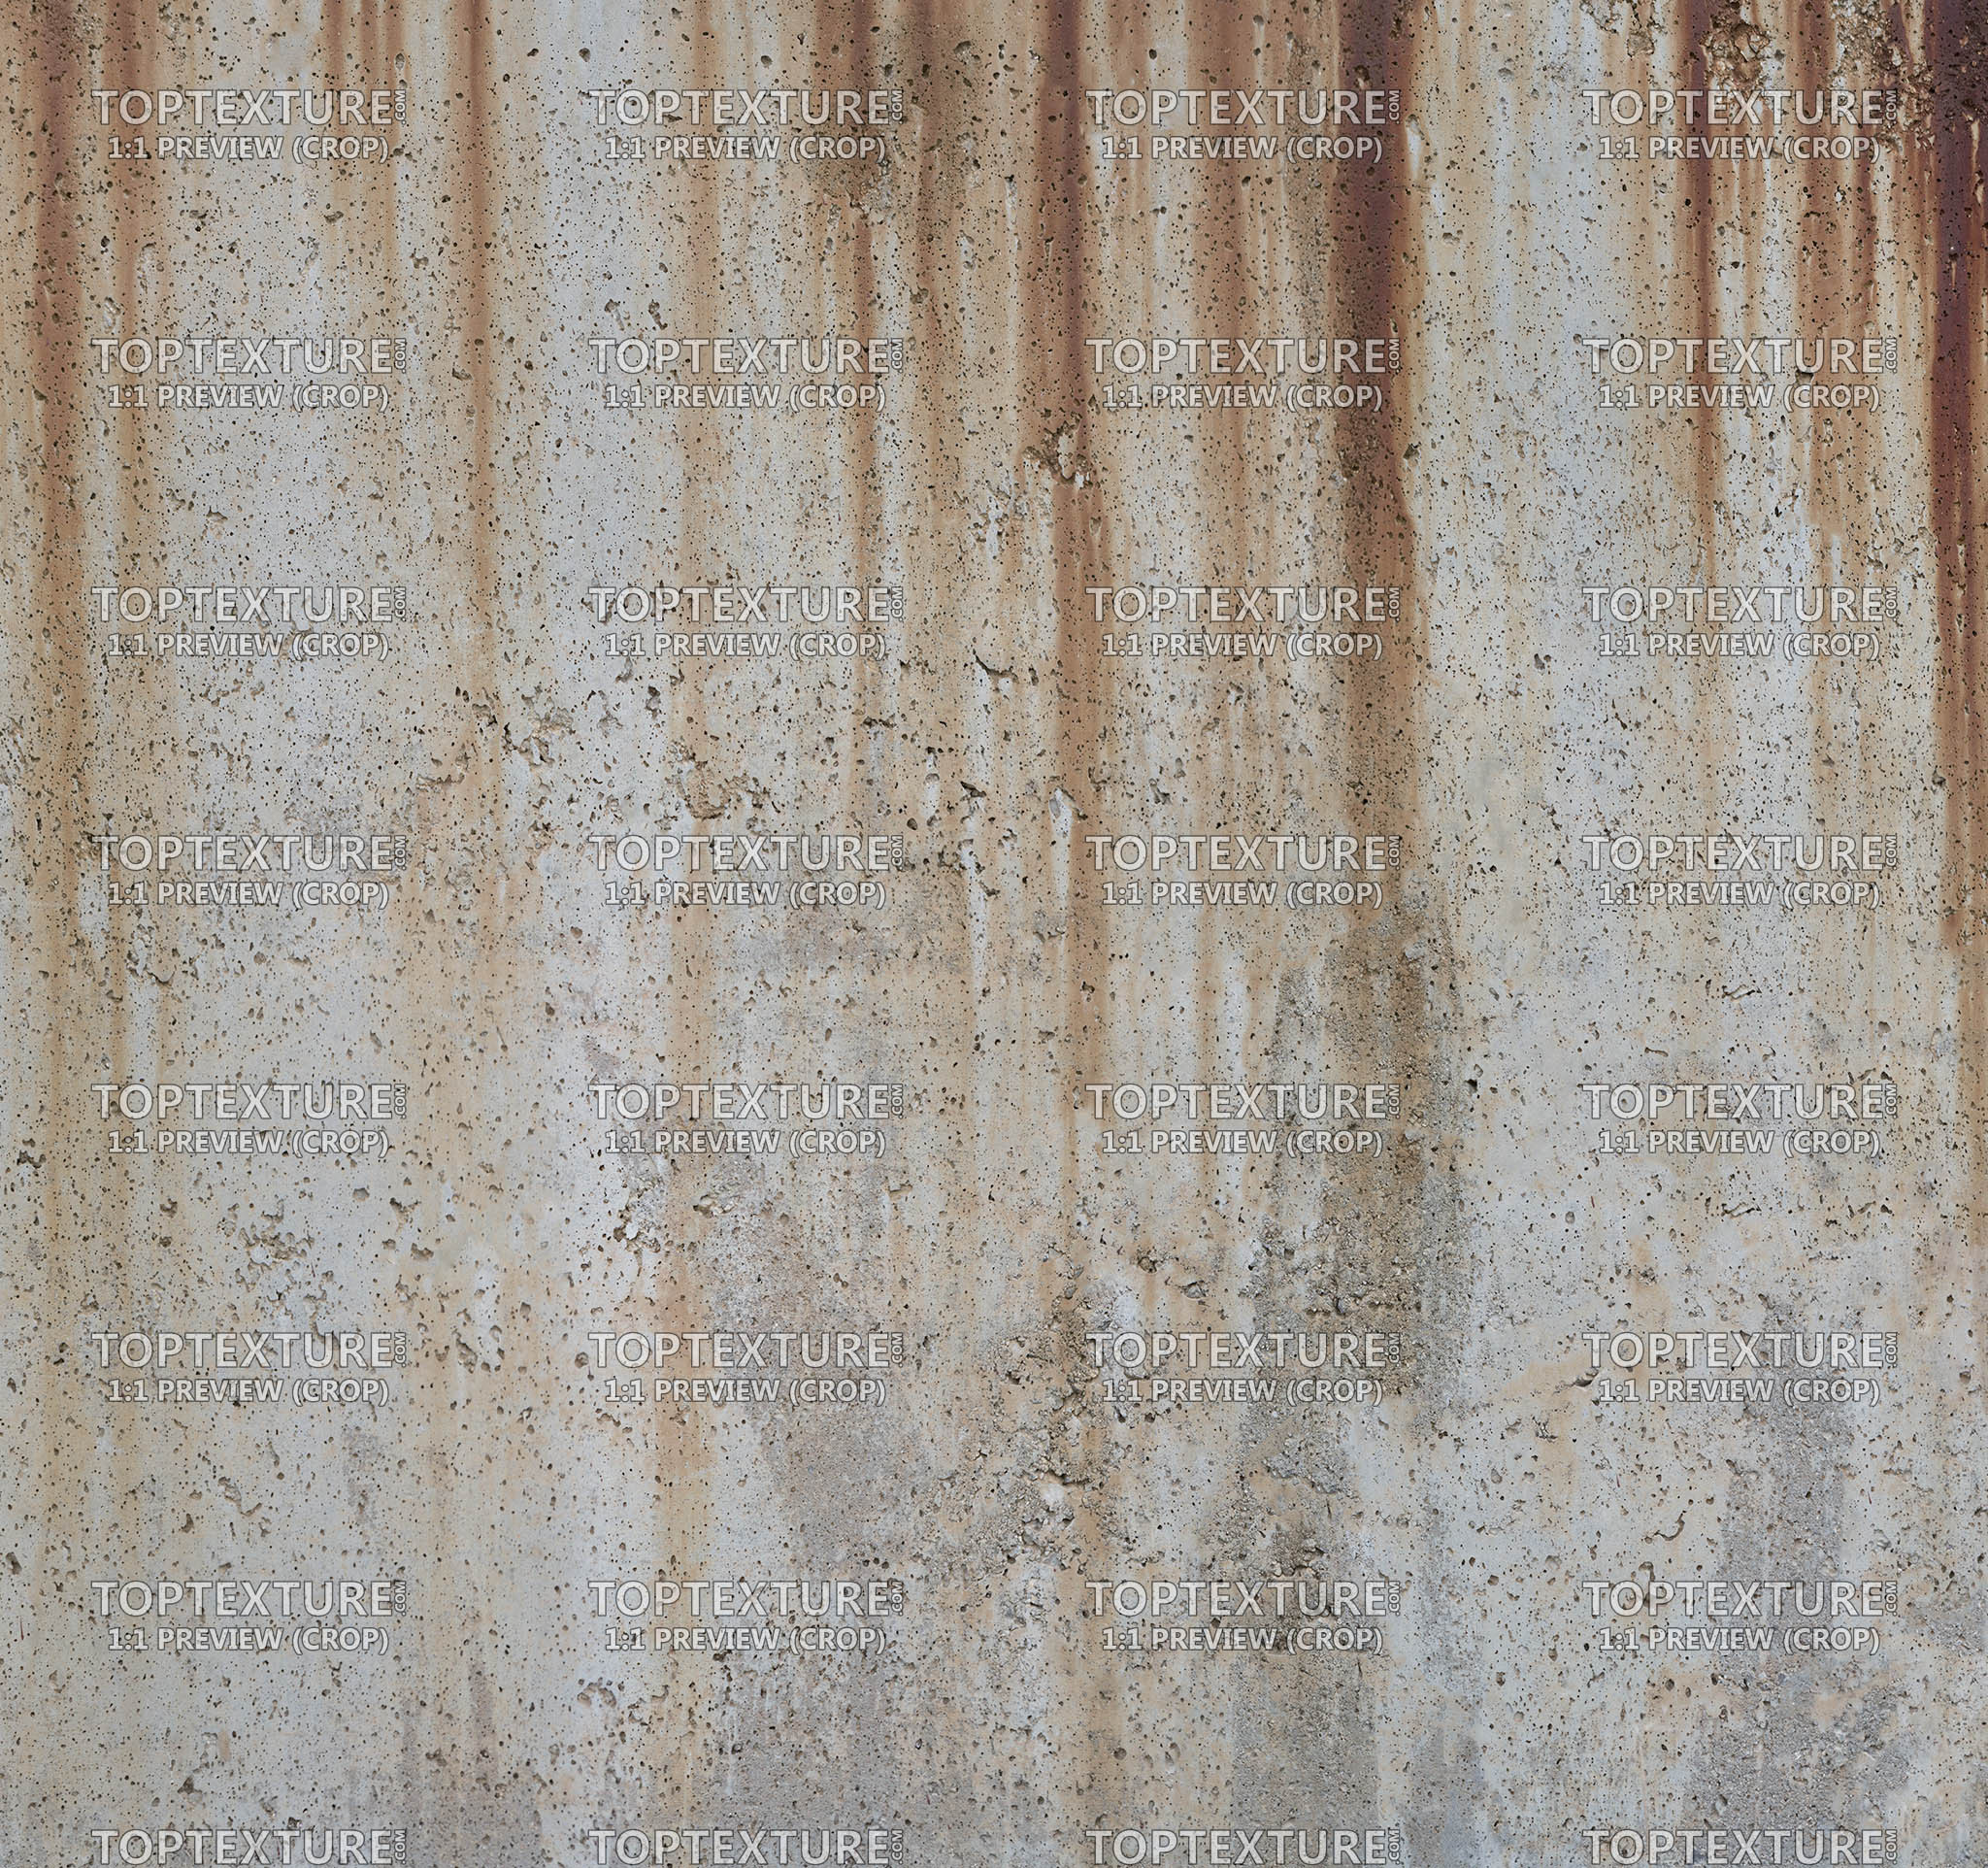 Rusty Leaking Grunge on Flat Concrete Wall - Top Texture